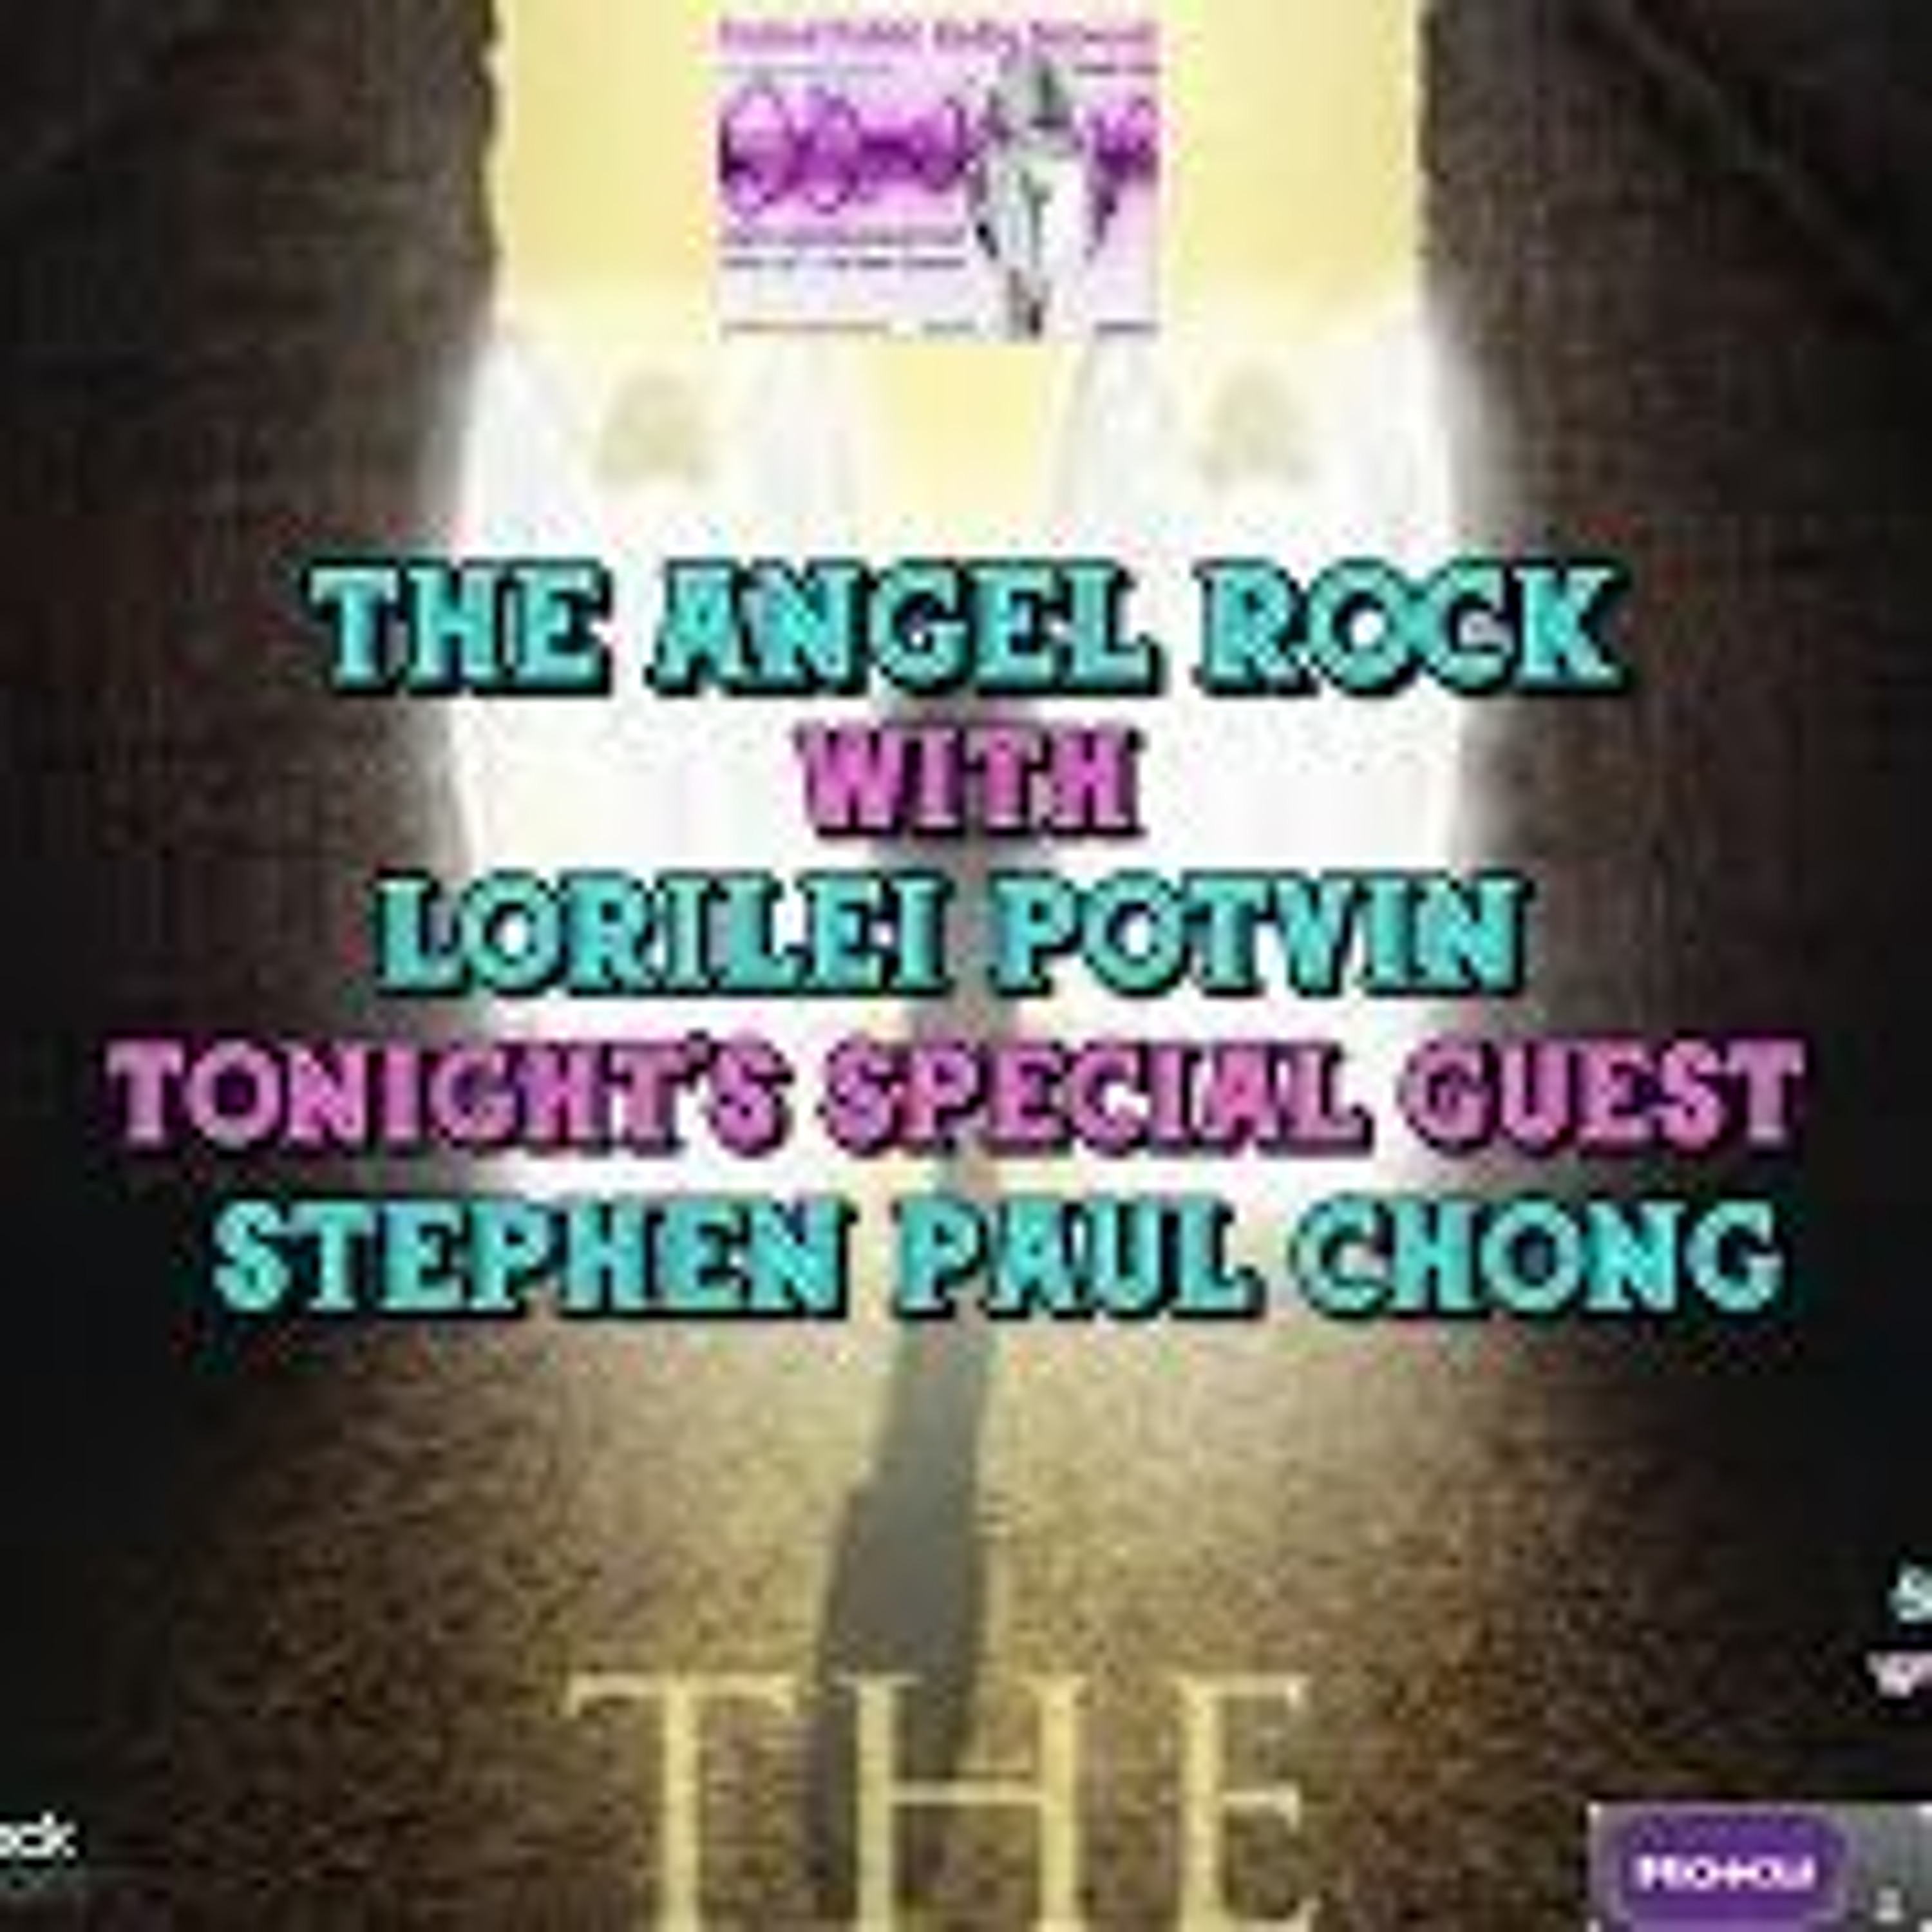 The Angel Rock With Lorilei Potvin & Guest Stephen Chong